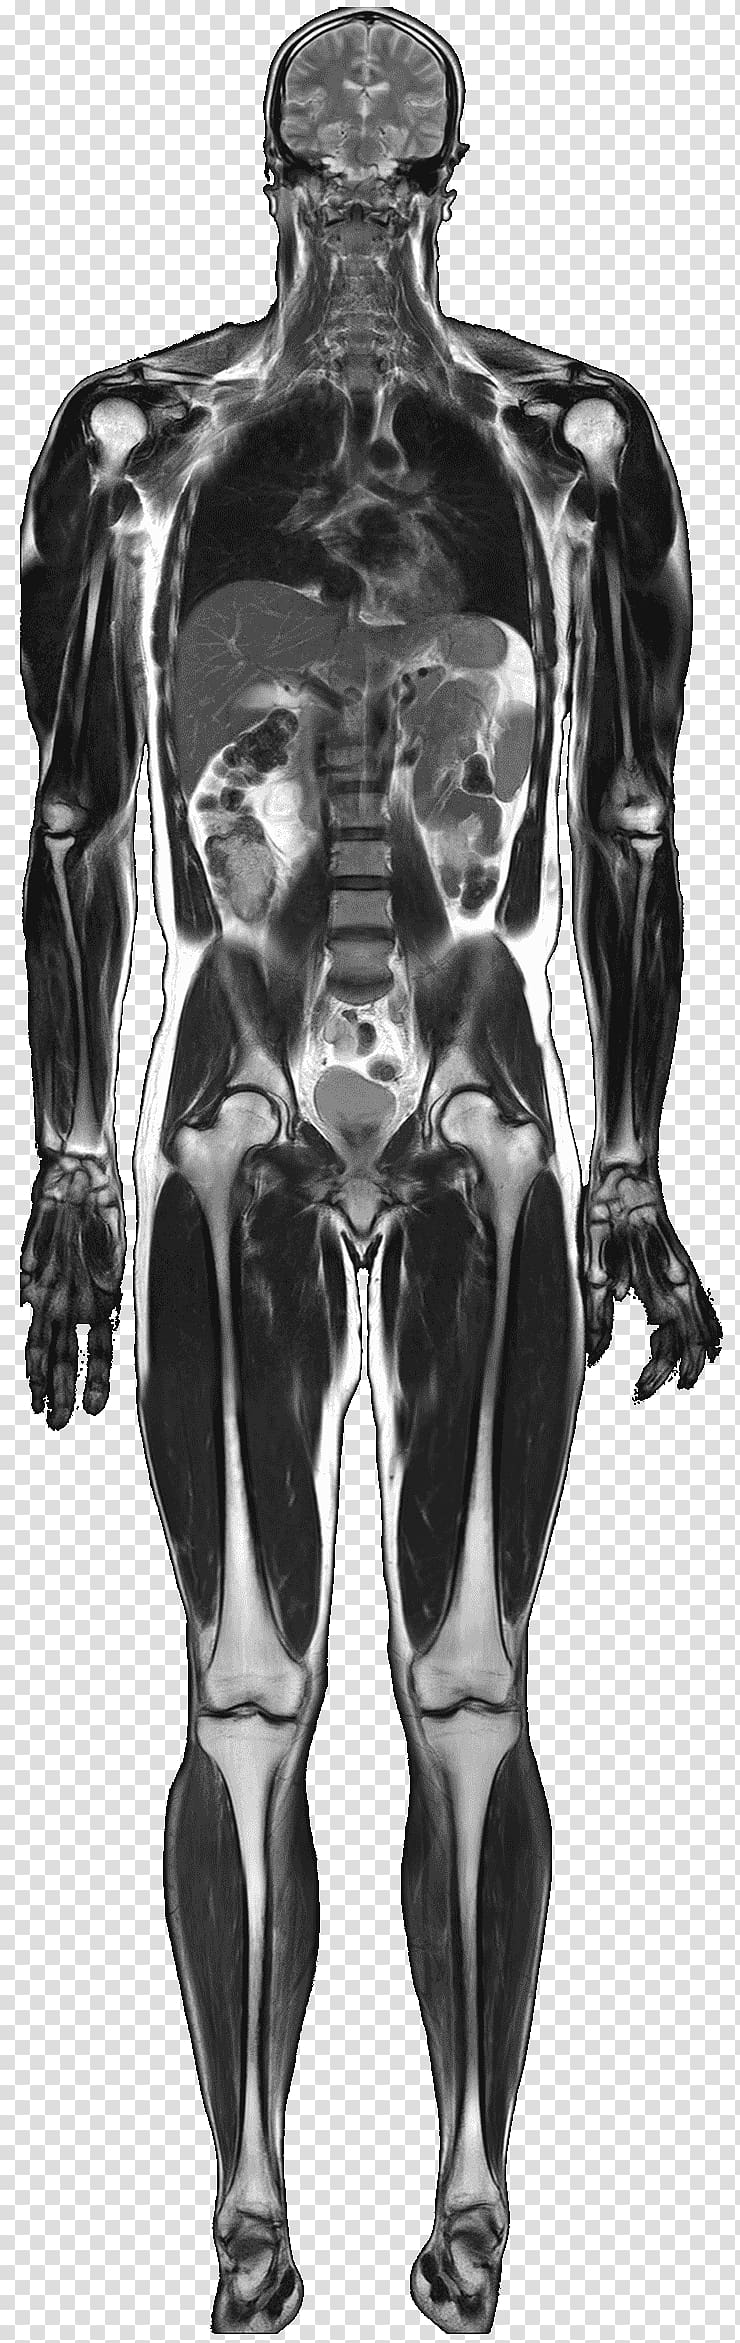 Magnetic resonance imaging Medical imaging Anatomy Human body Nuclear magnetic resonance, standard body transparent background PNG clipart